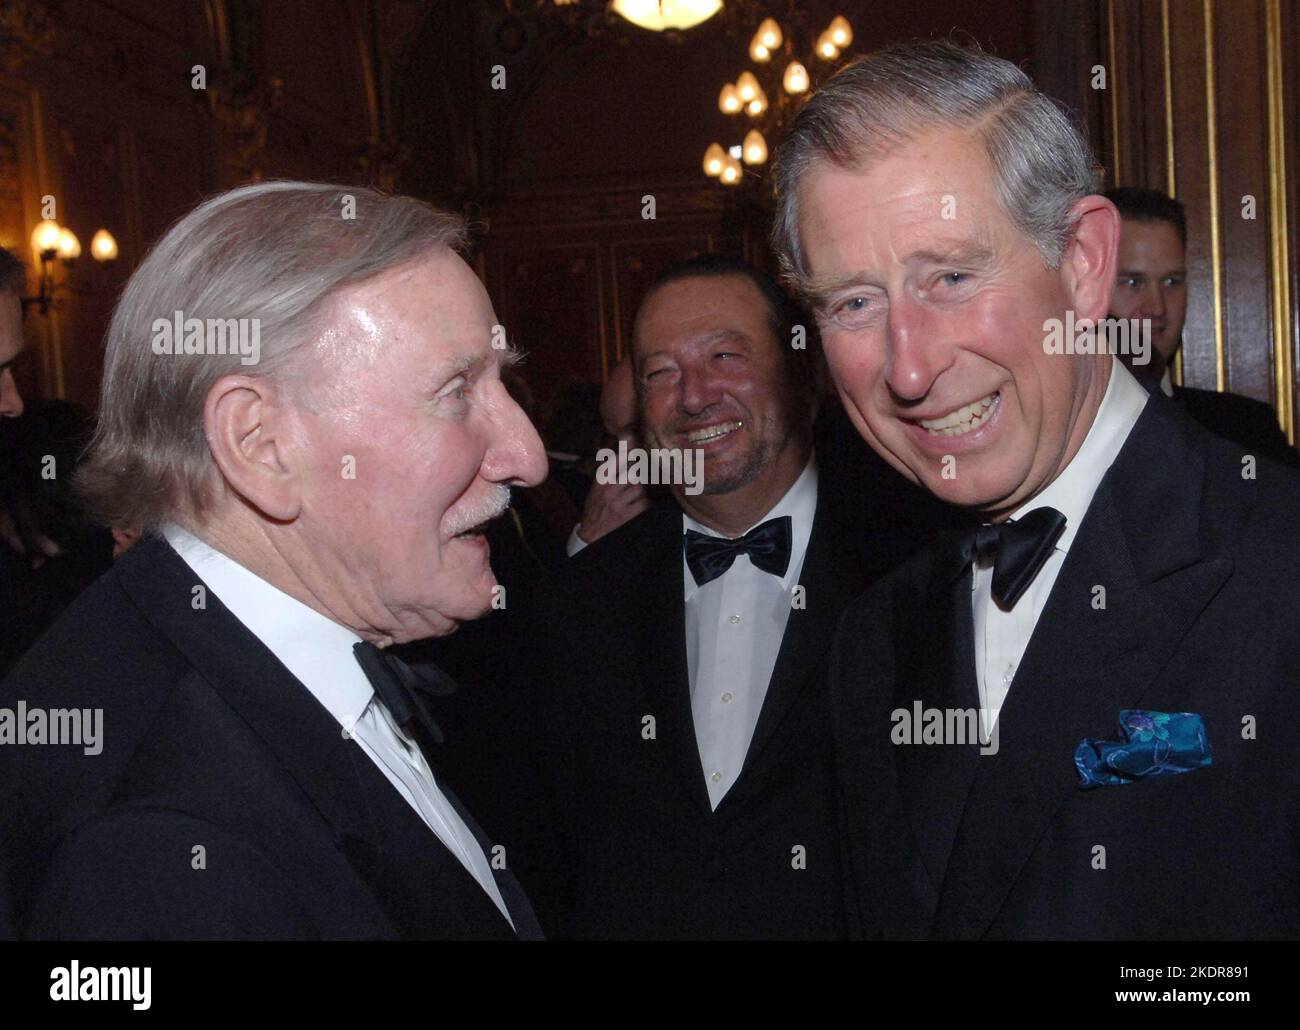 File photo dated 17/05/06 of King Charles III, then known as The Prince of Wales chatting with actor Leslie Phillips (left) at the Royal Shakespeare Company's gala fund raising dinner for their 'Complete Works Festival', in London. Mr Phillips passed away on Monday aged 98. Stock Photo